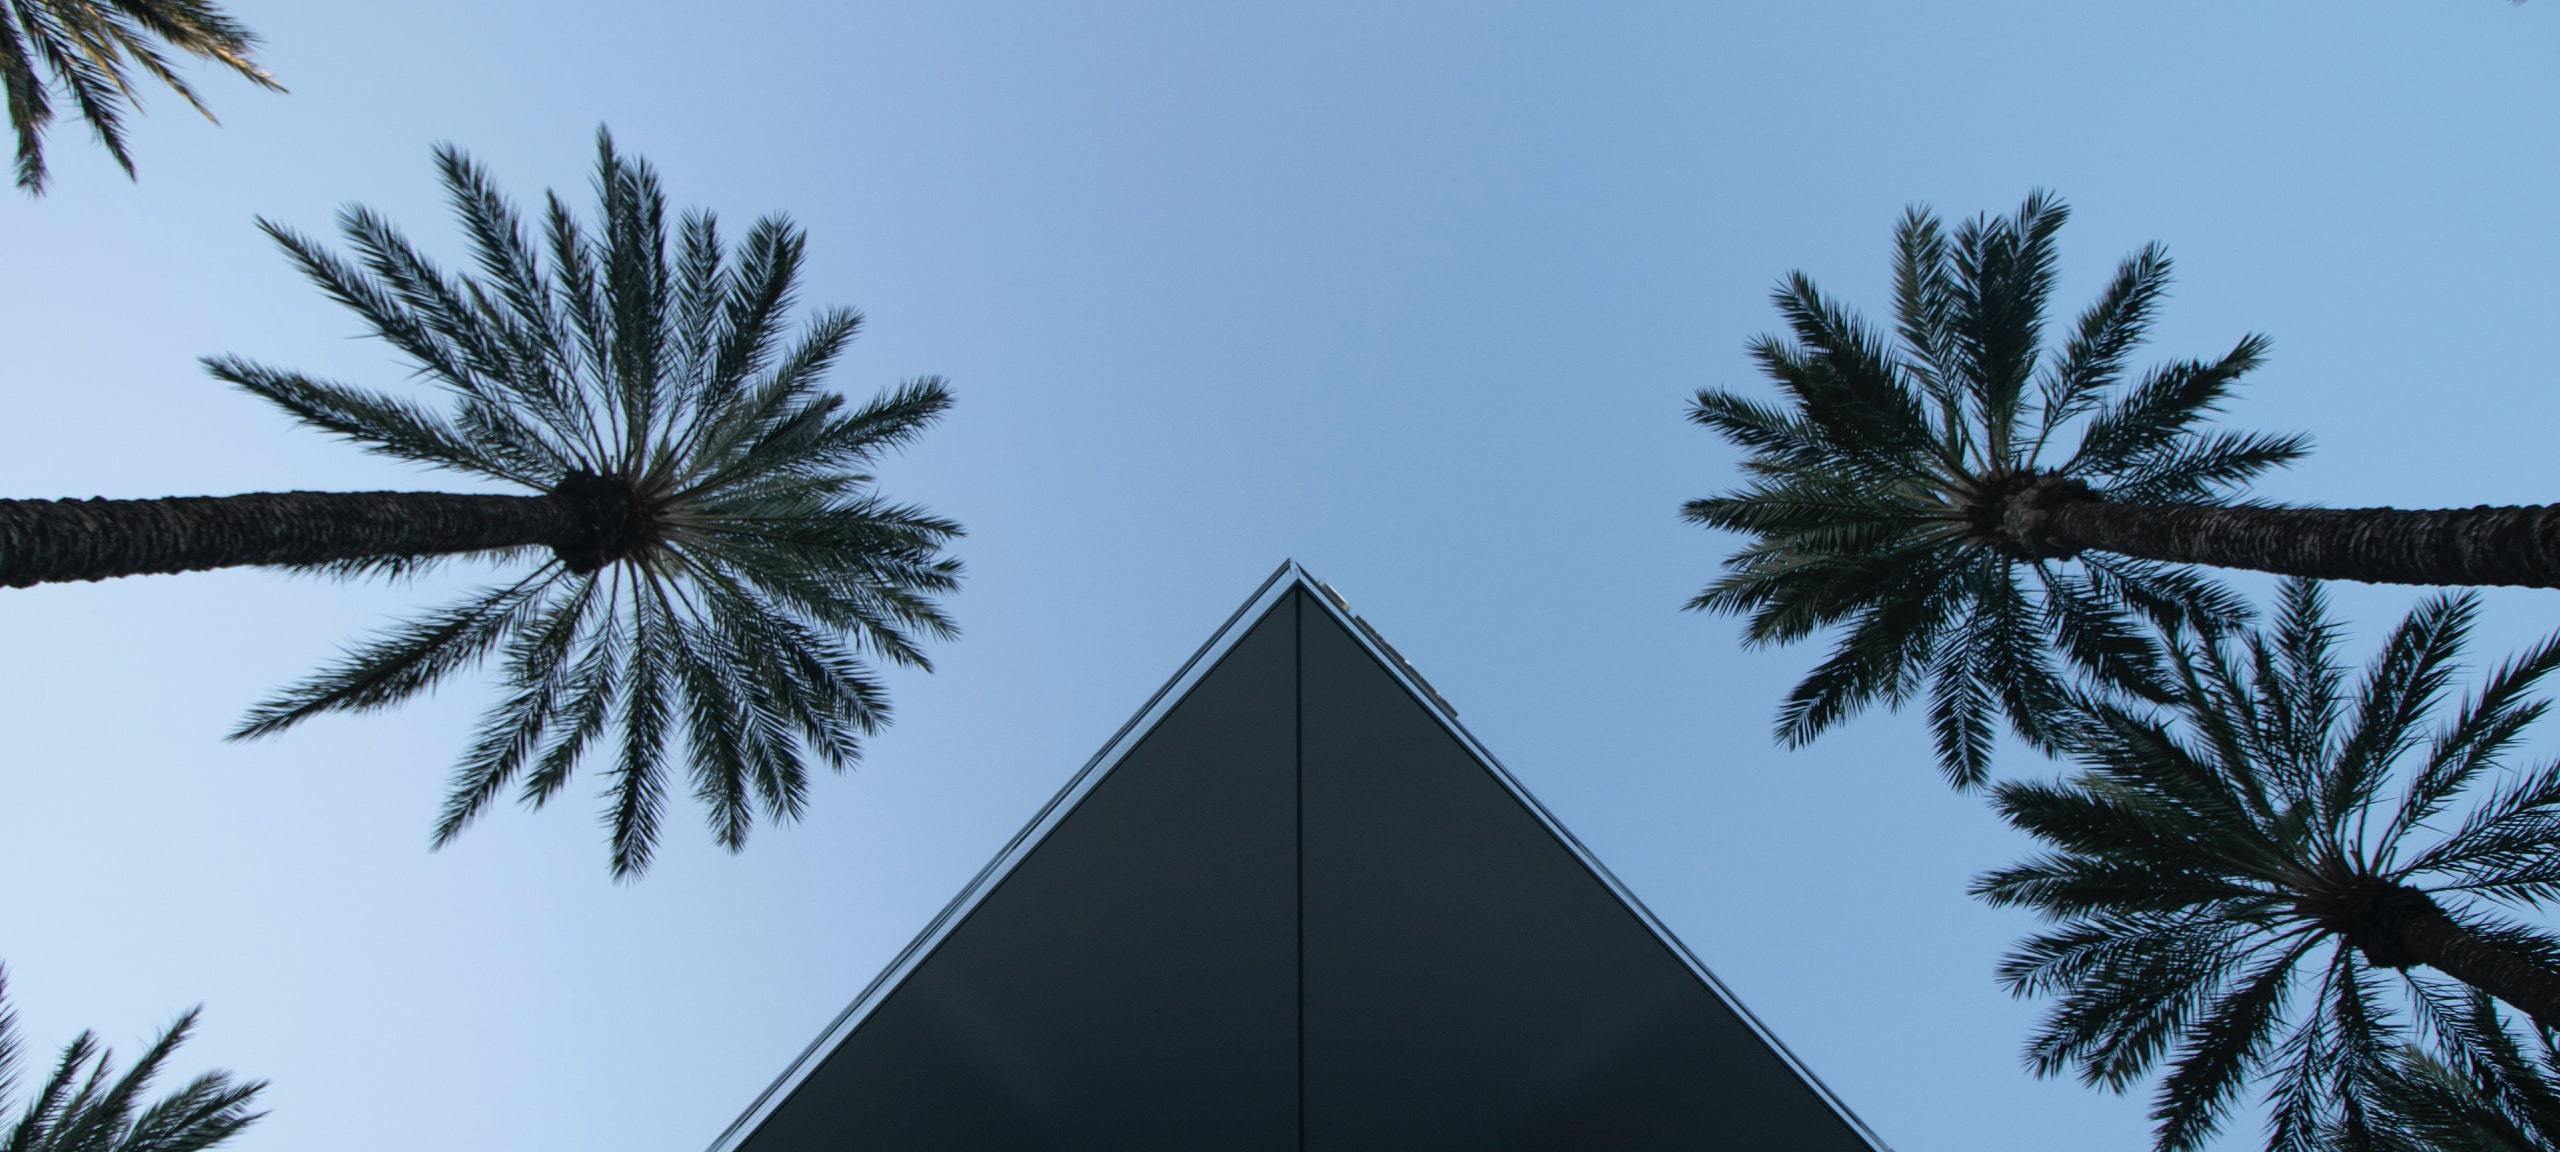 Upwards silhouette of building and palm trees in Irvine